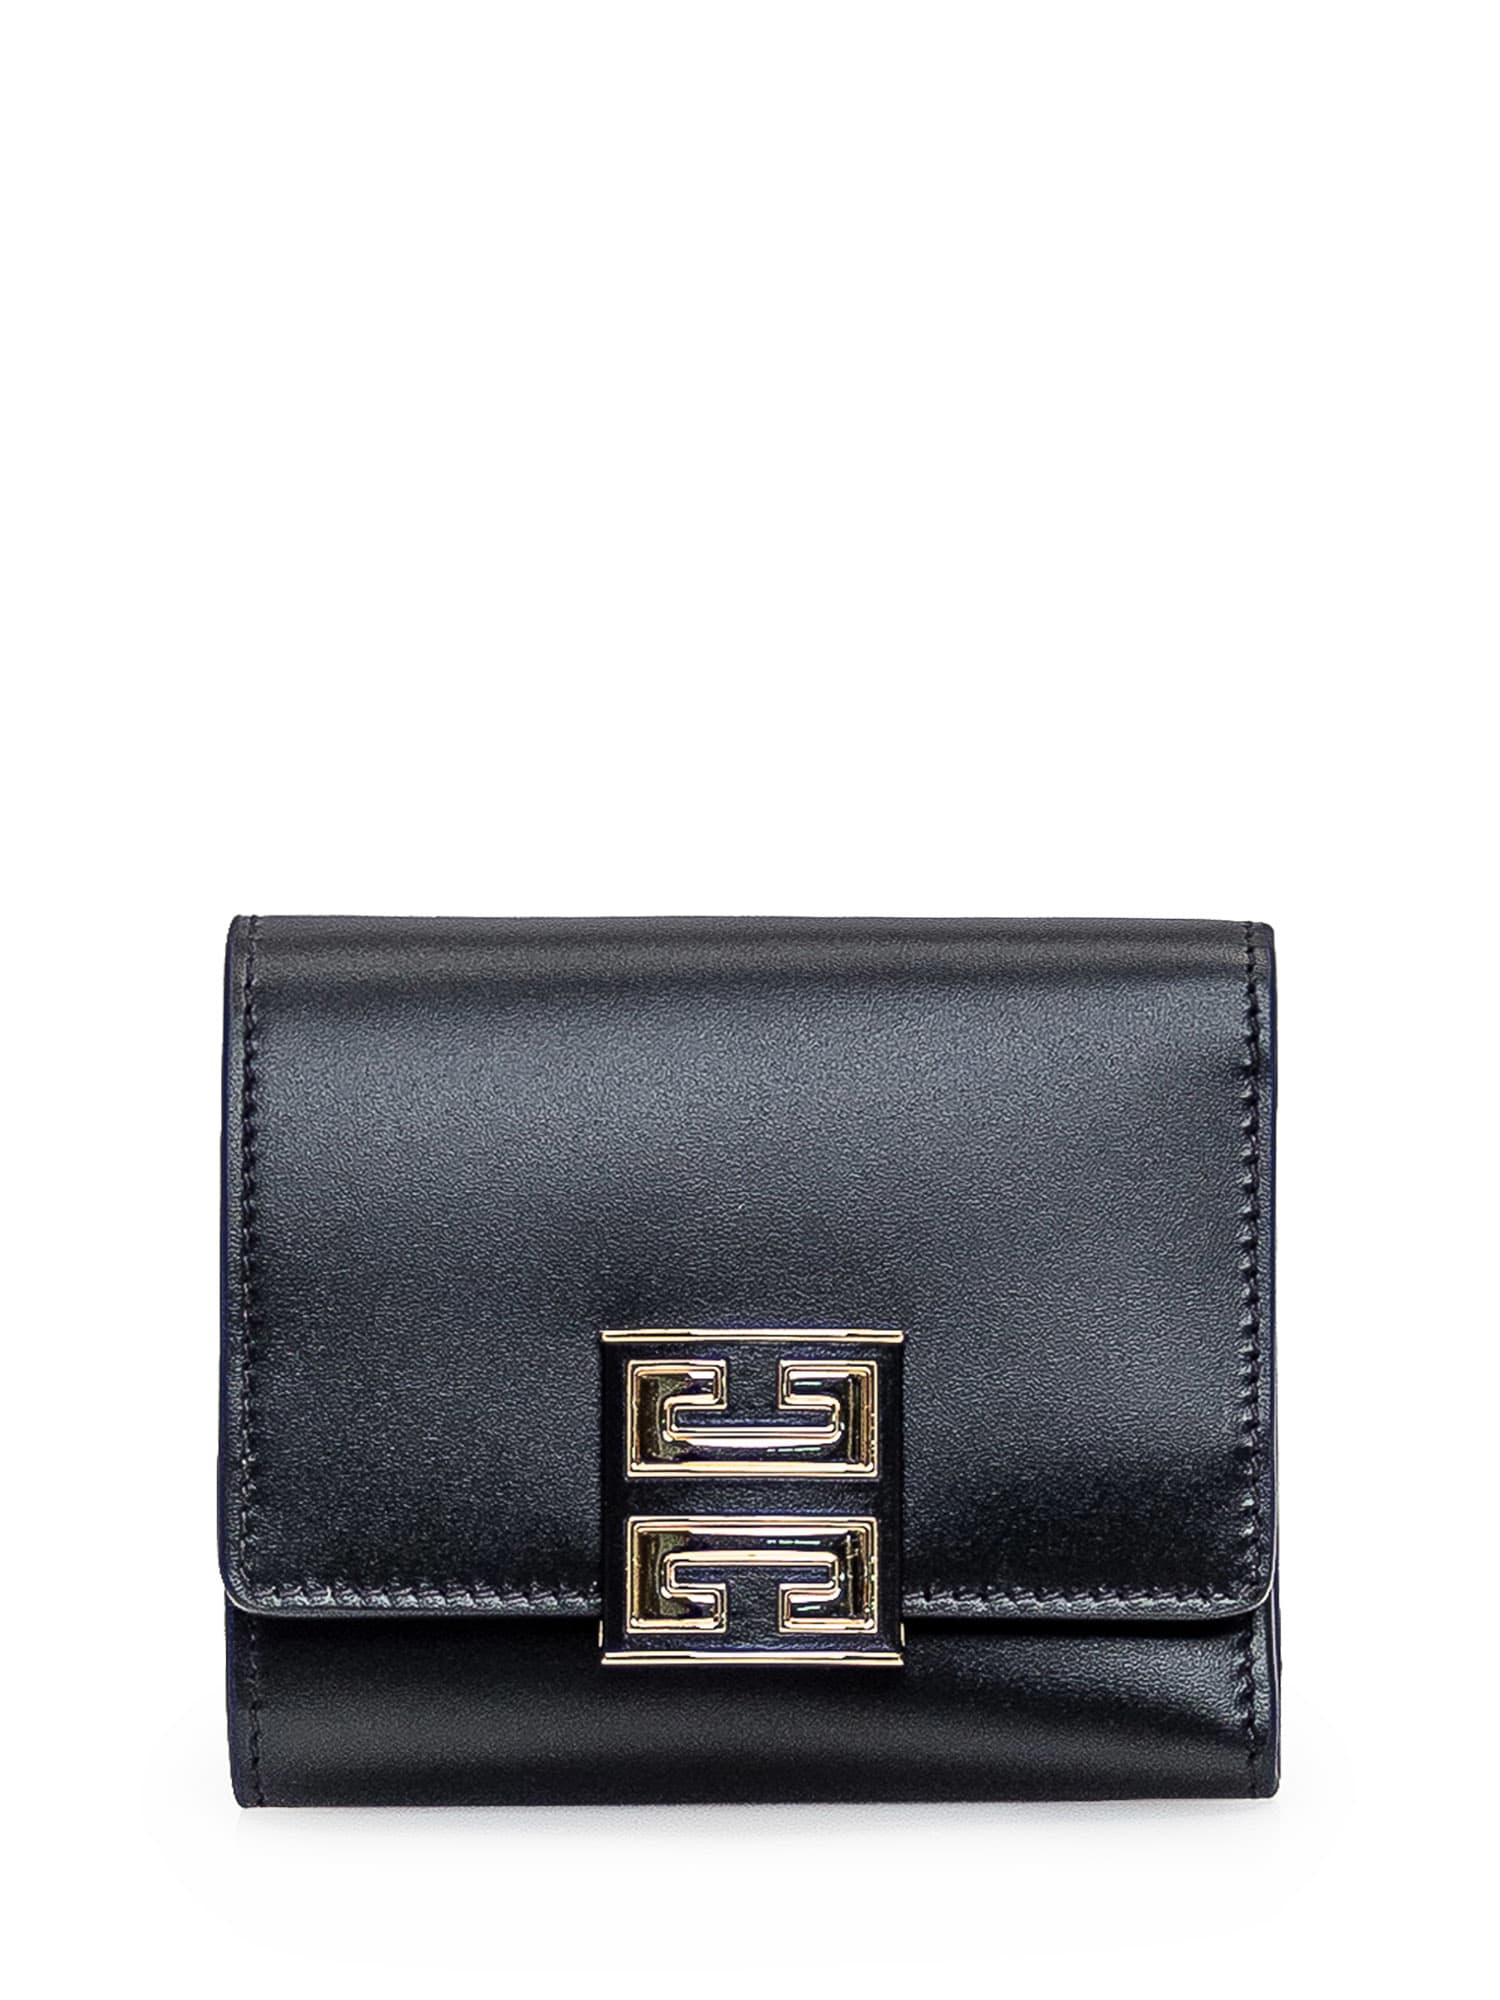 Givenchy Leather 4g Wallet In Black